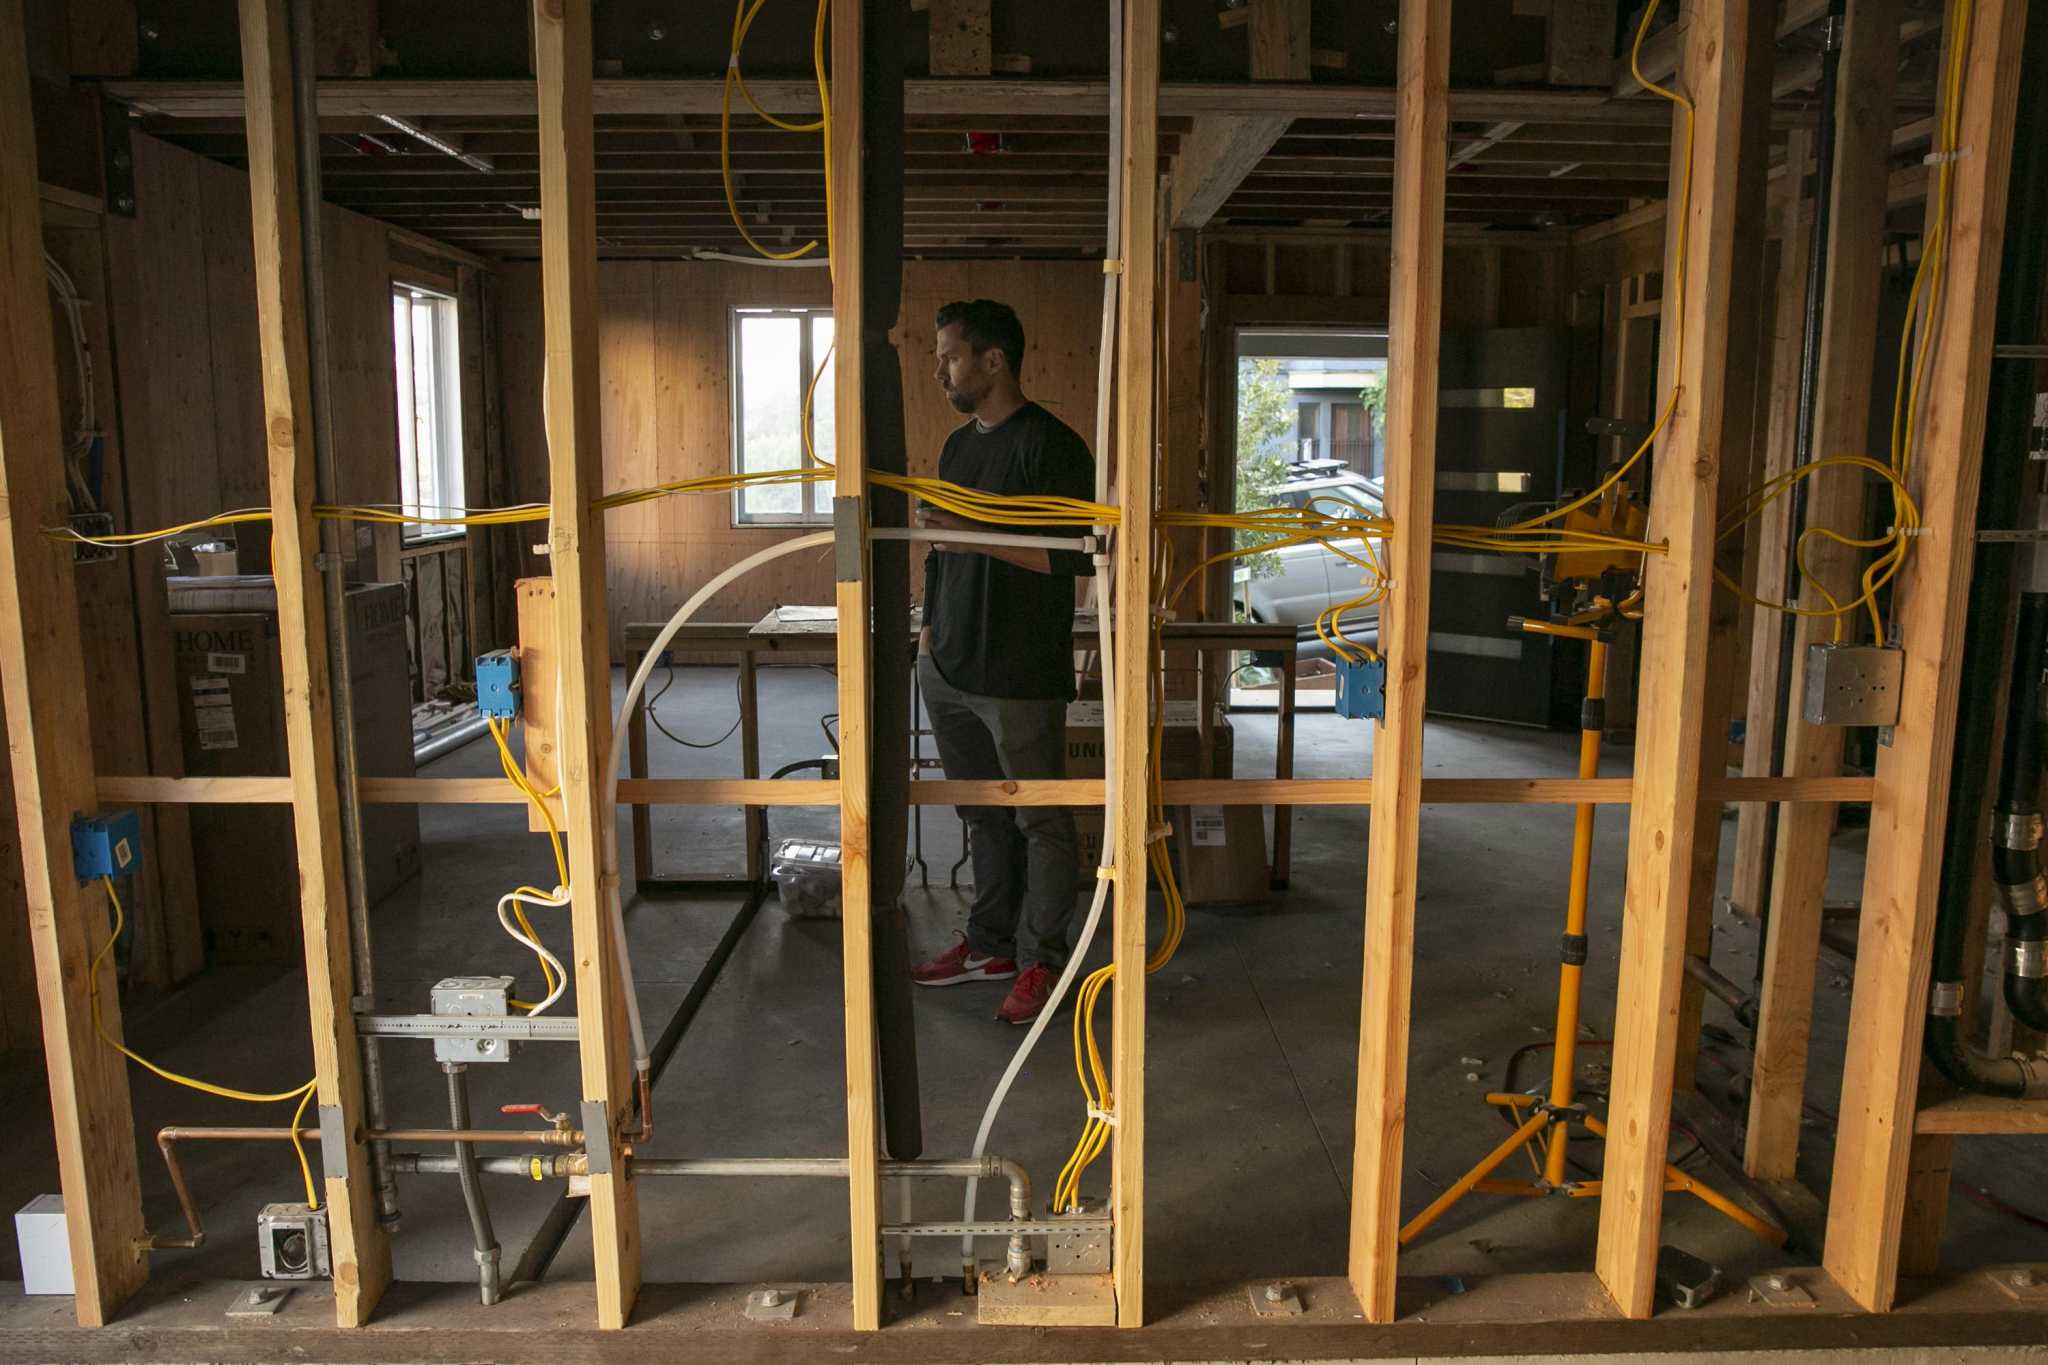 One S.F. man keeps pushing to build homes. Here's why the city may be forced to say yes in 2023